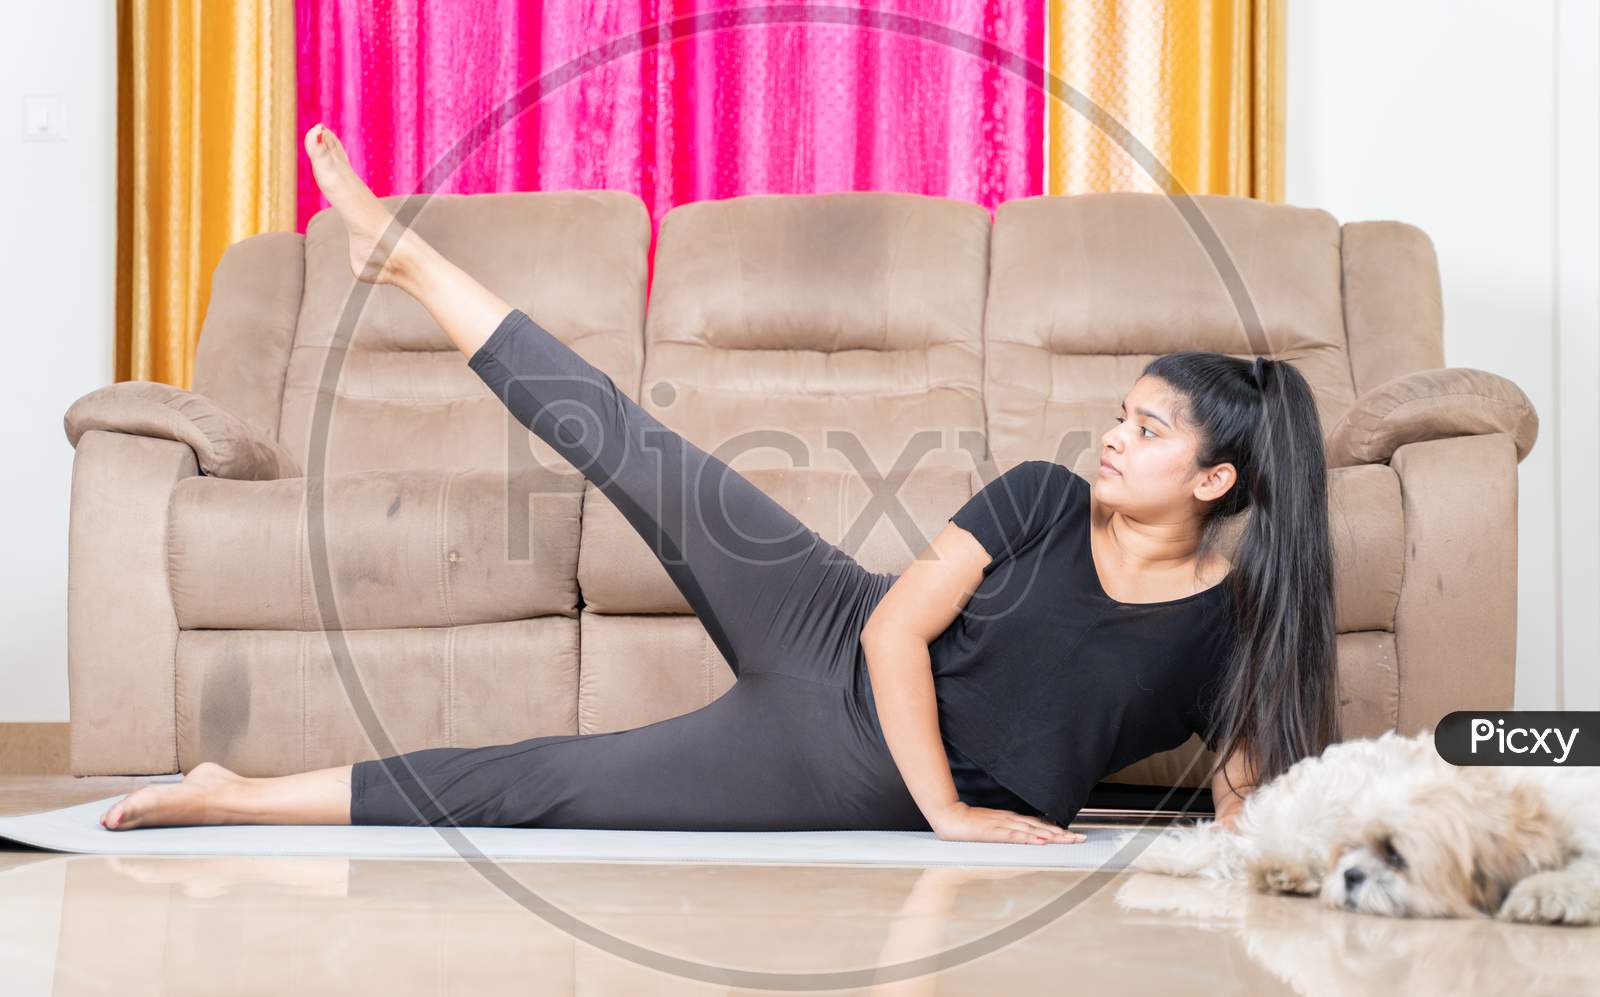 Young Girl With Her Pet Aside Doing Exercise On Yoga Mat At Home - Concept Of New Normal Healthy Lifetyle Due To Coronavirus Covid-19 Pandemic.